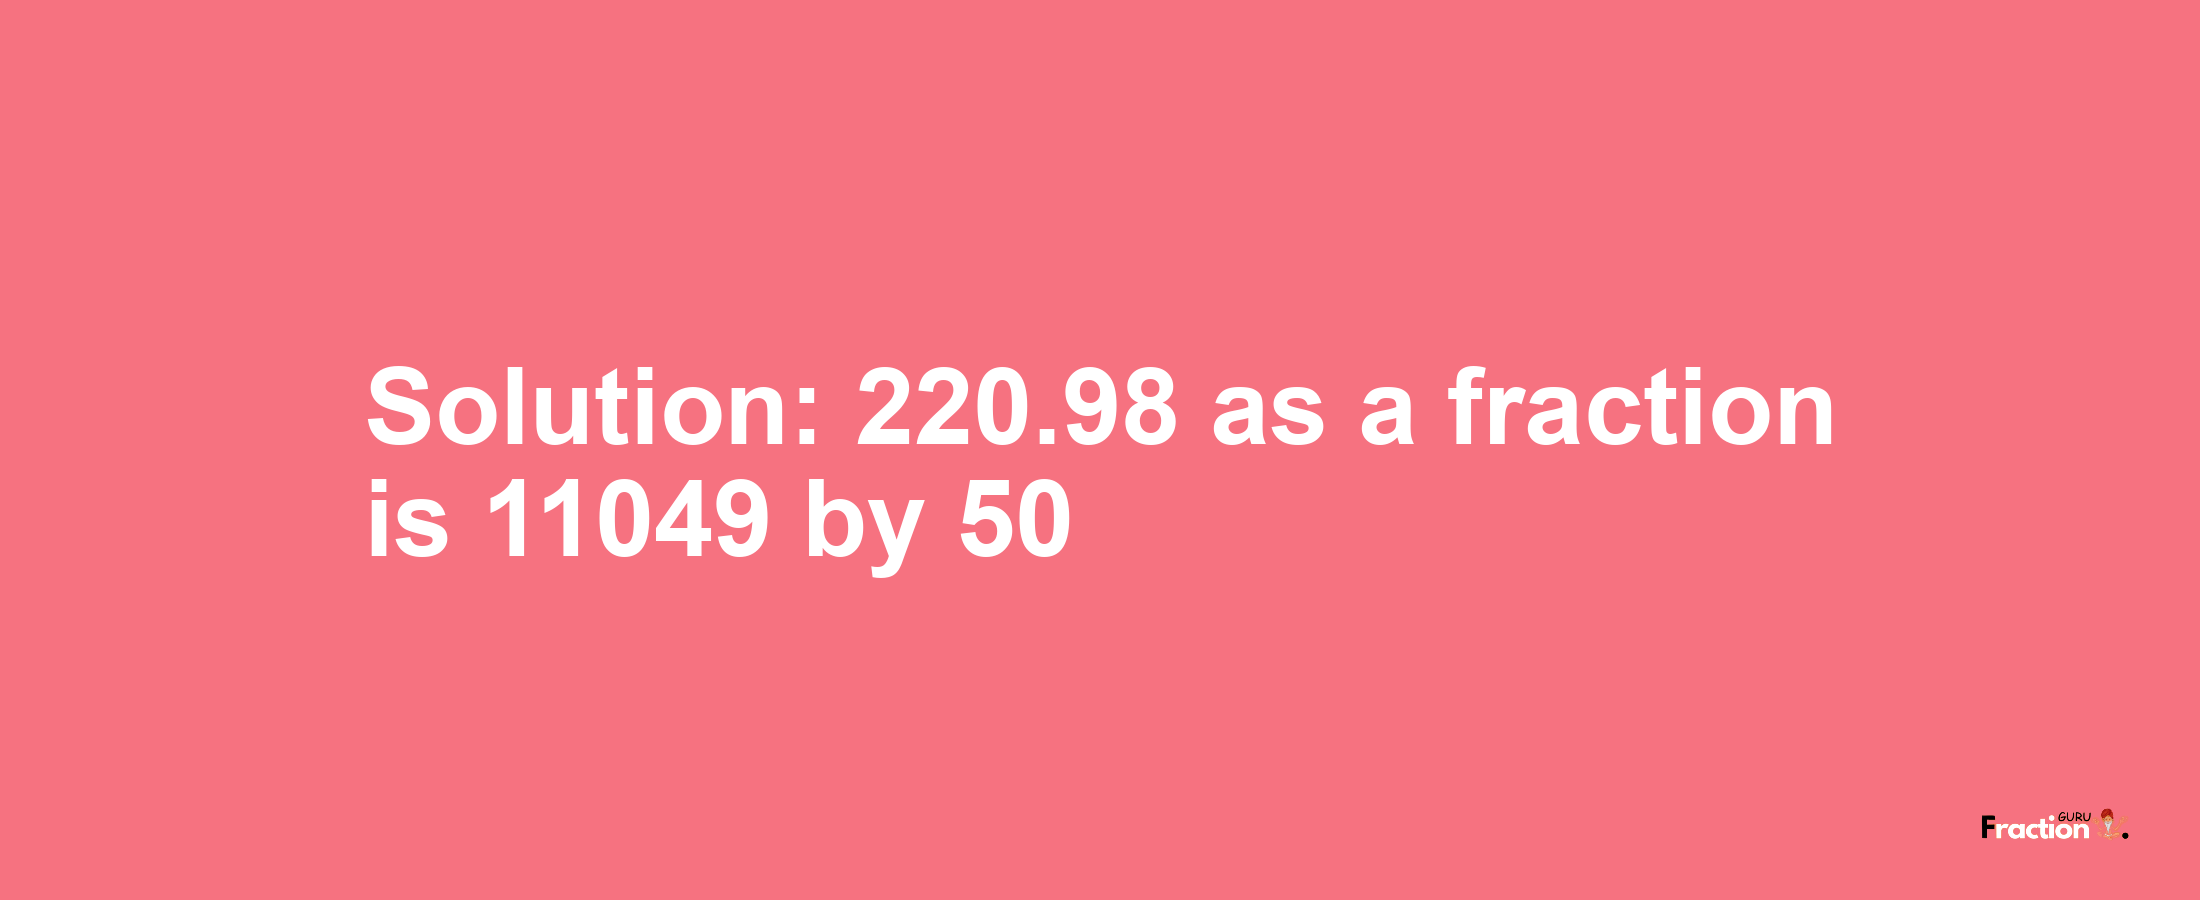 Solution:220.98 as a fraction is 11049/50